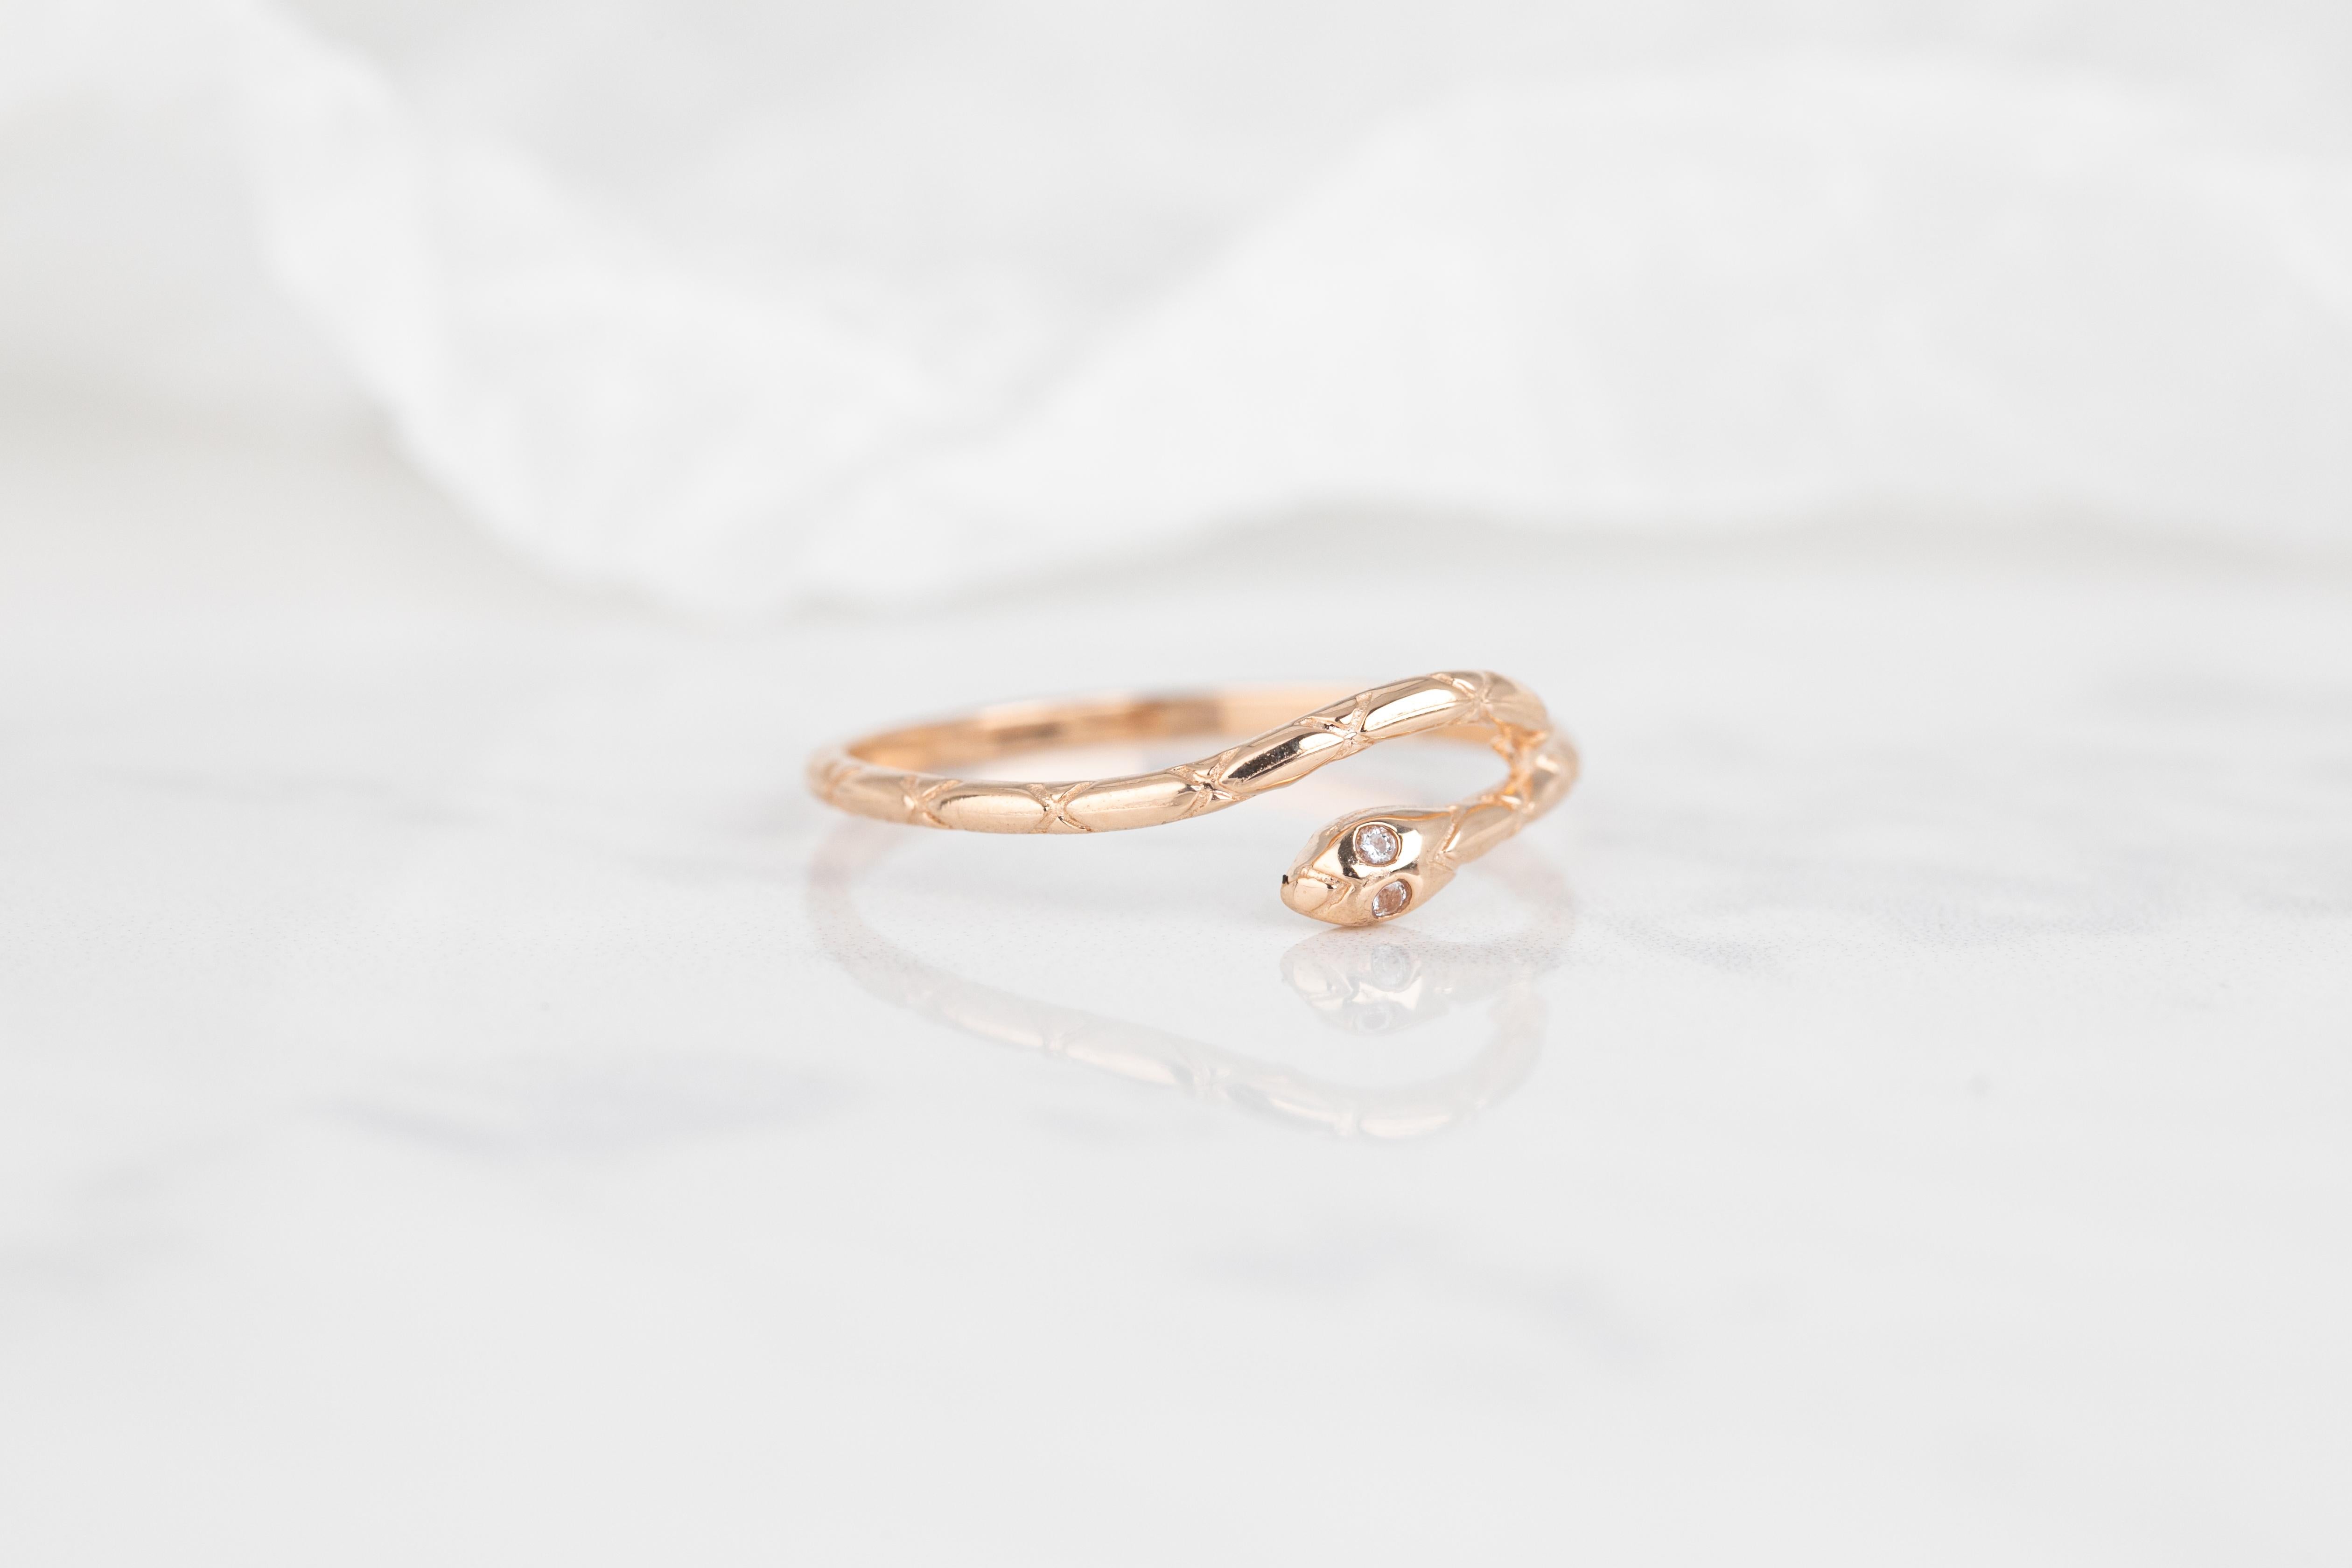 For Sale:  14k Gold Snake Ring, Serpent Shape Pinky, Stackable Ring with Moissanite 2